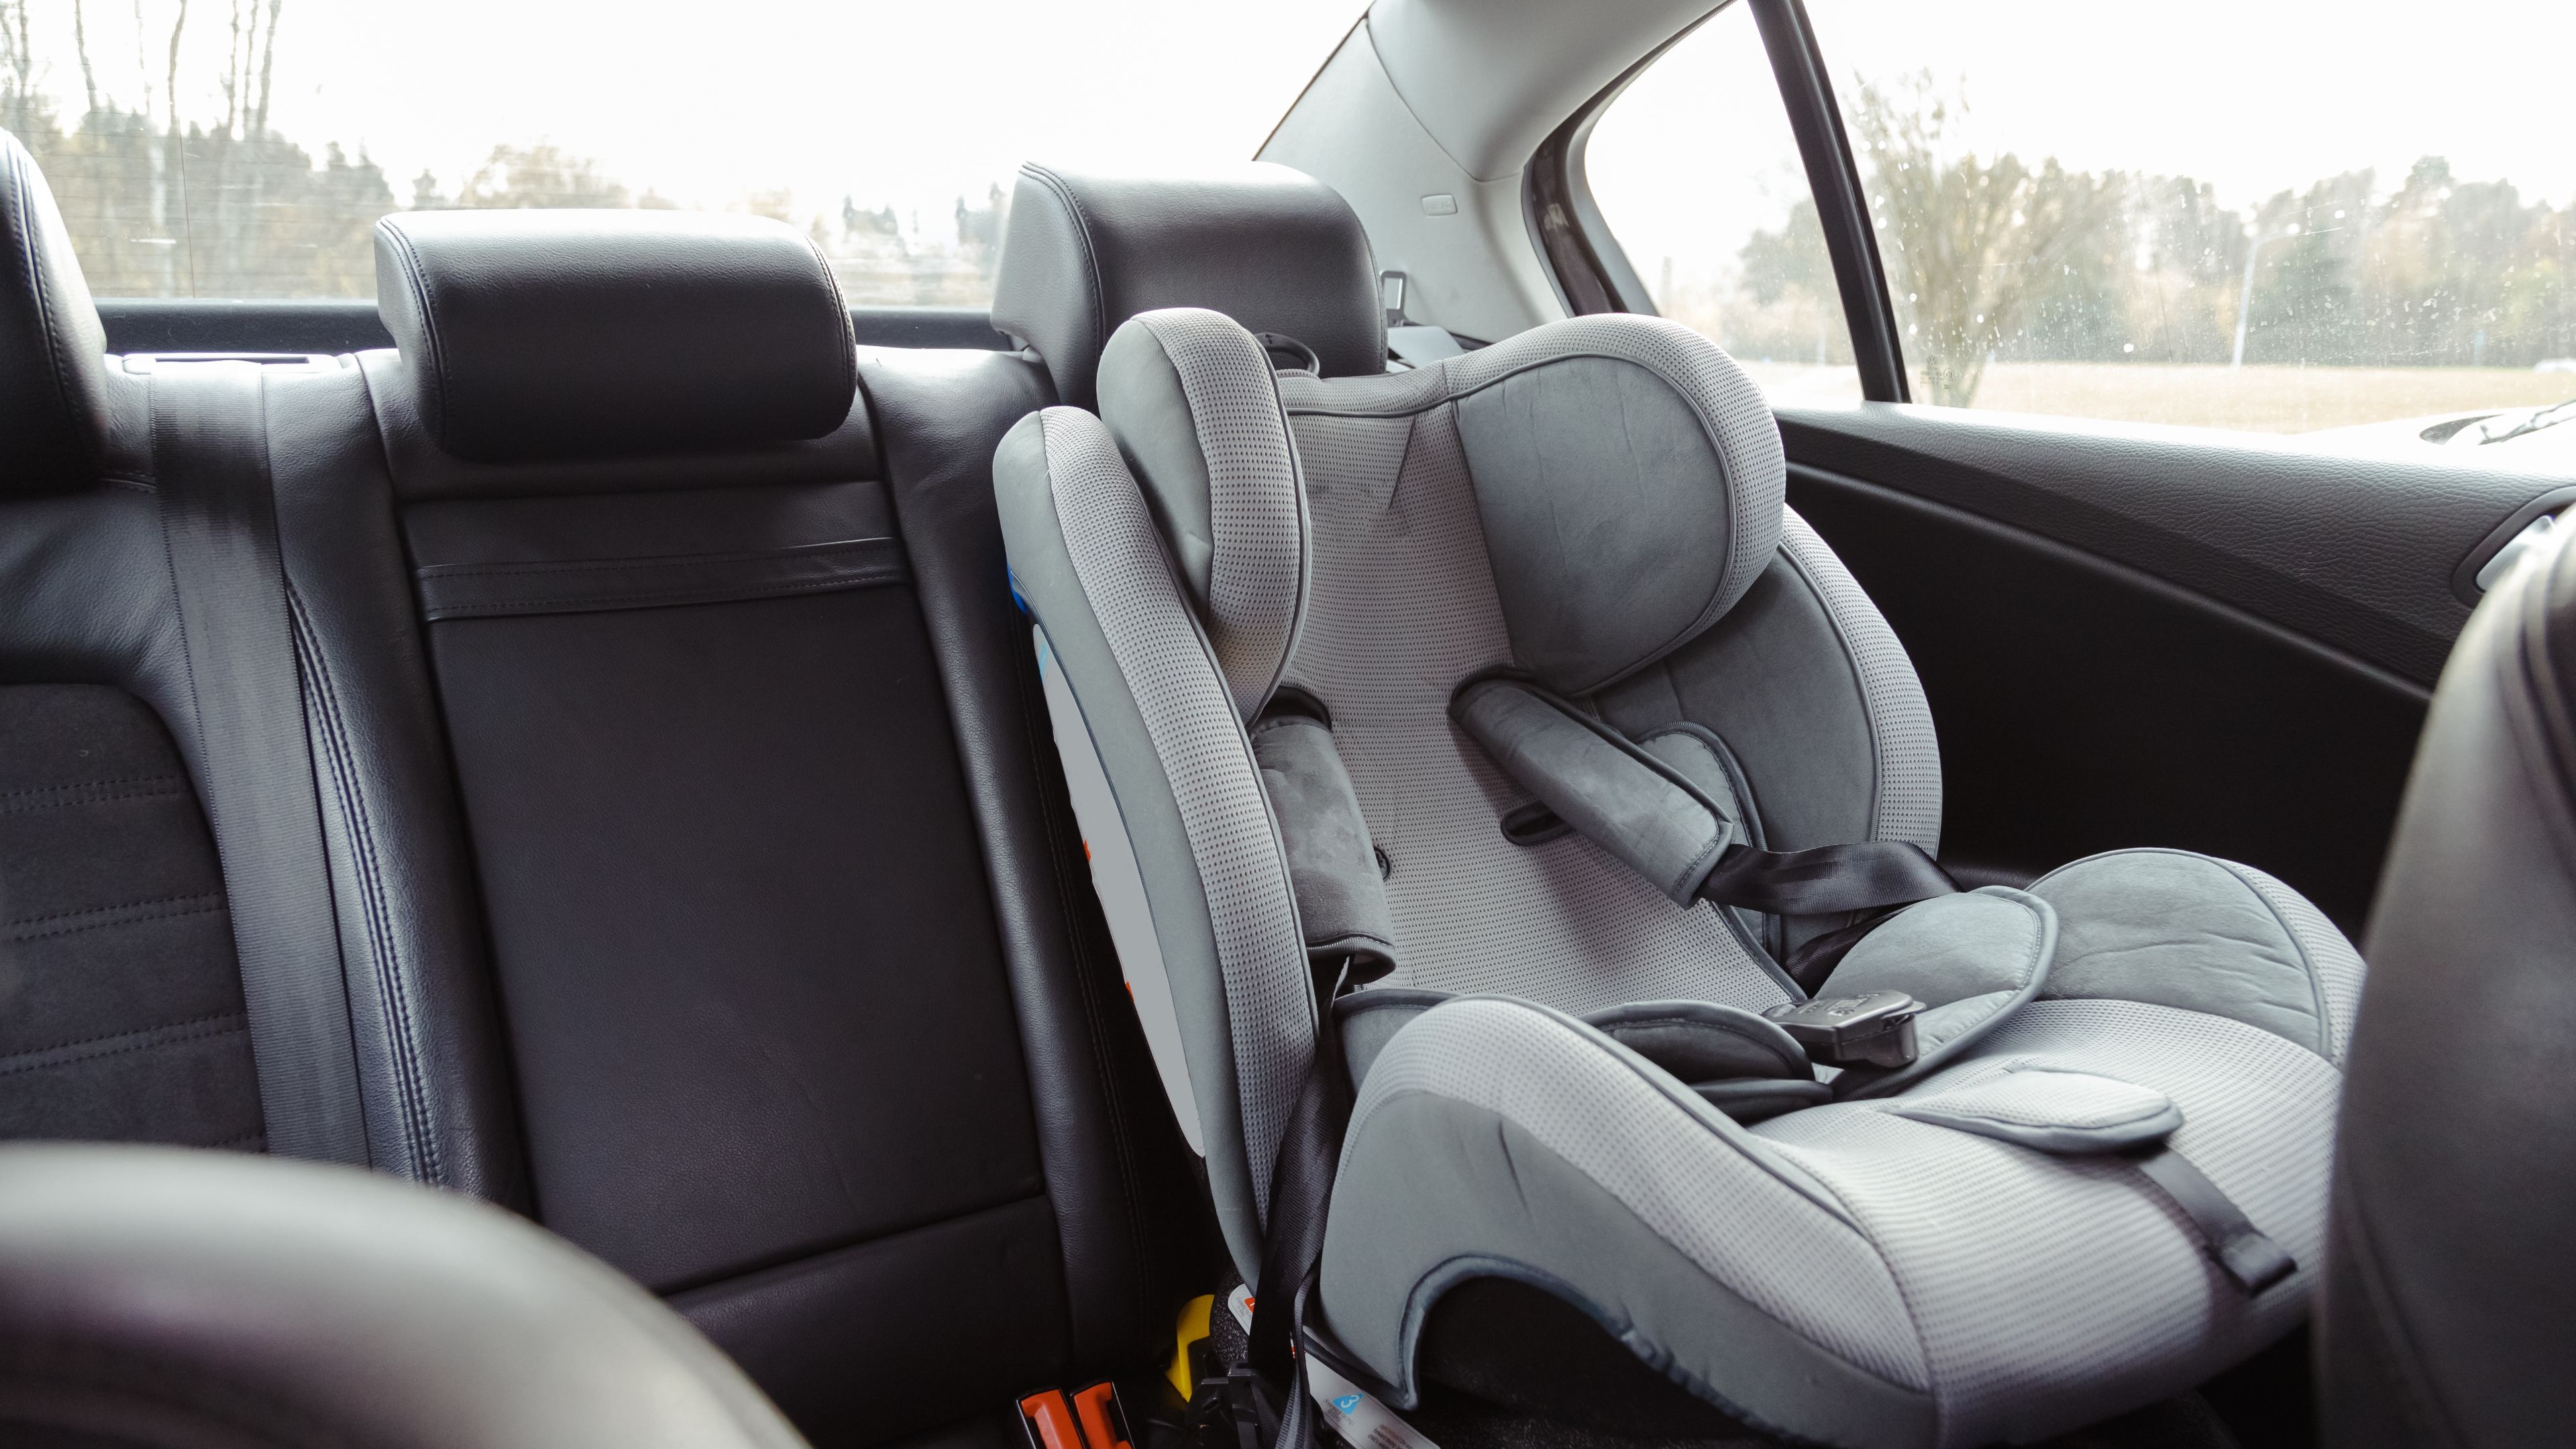 How to get stains out of car seats in 8 steps